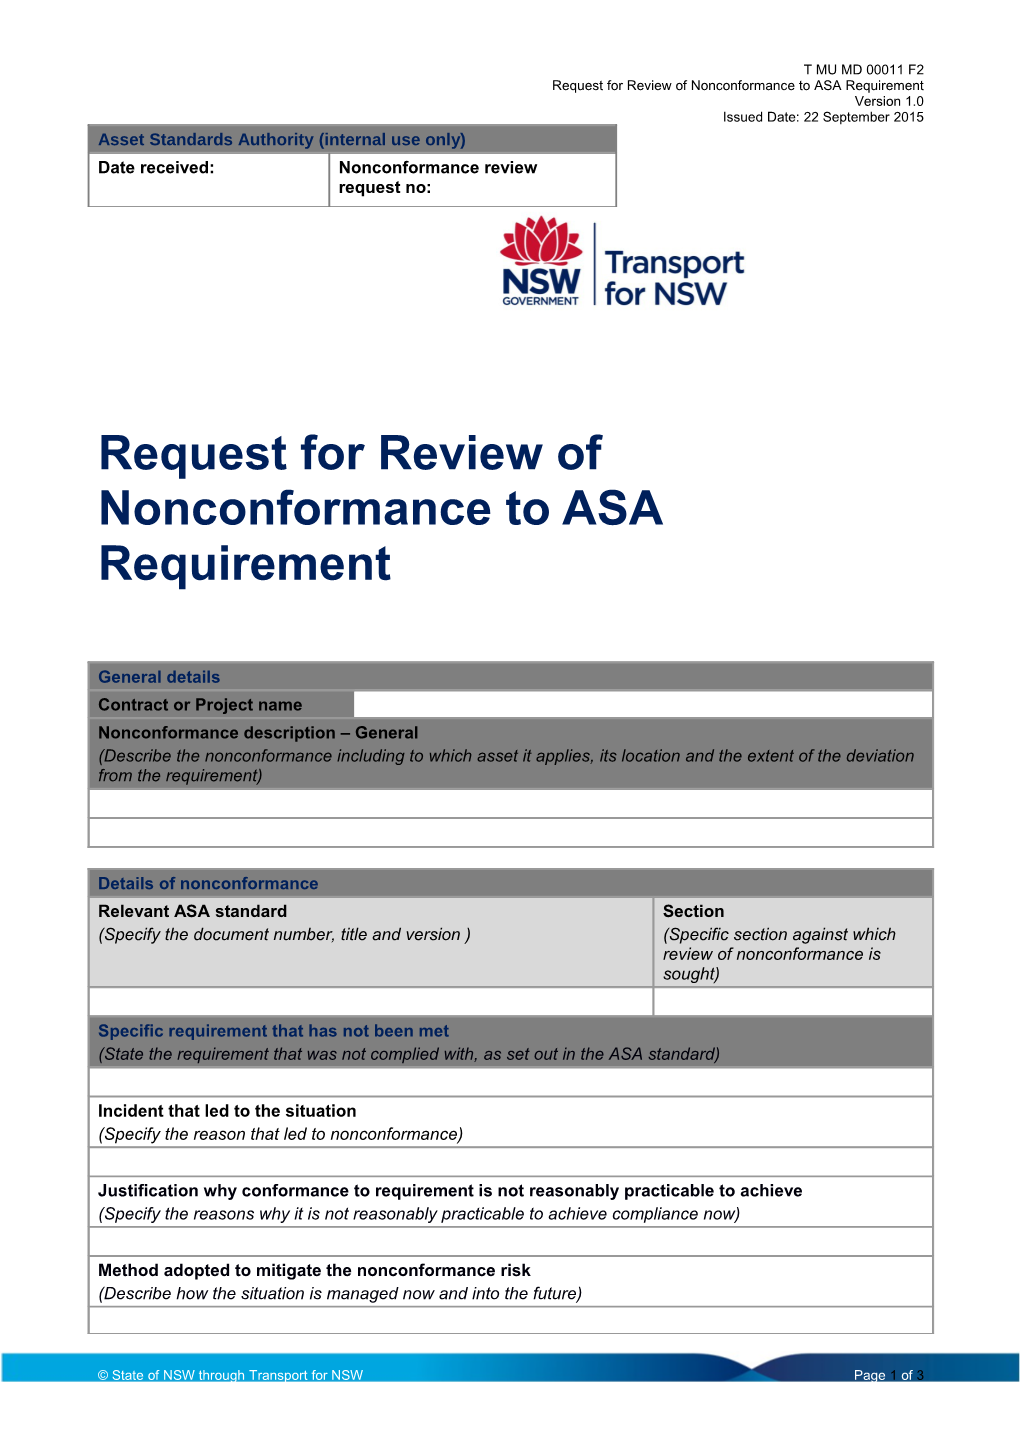 Request for Review of Nonconformance to ASA Requirement